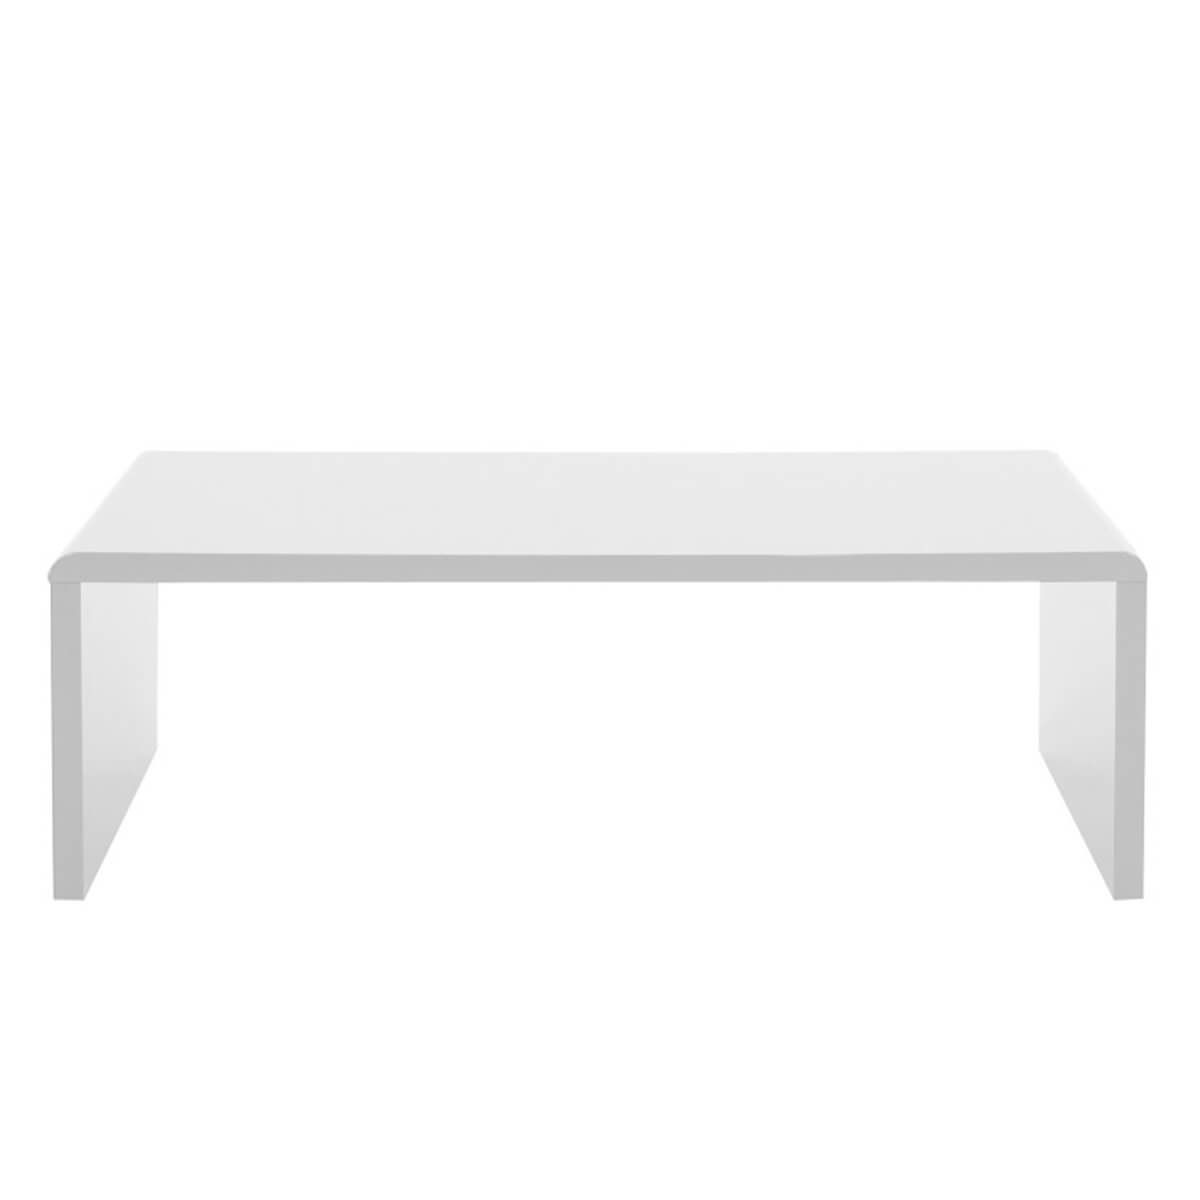 Sasha White High Gloss Coffee Table | Coffee Tables | Fads In White Gloss And Maple Cream Coffee Tables (View 11 of 15)